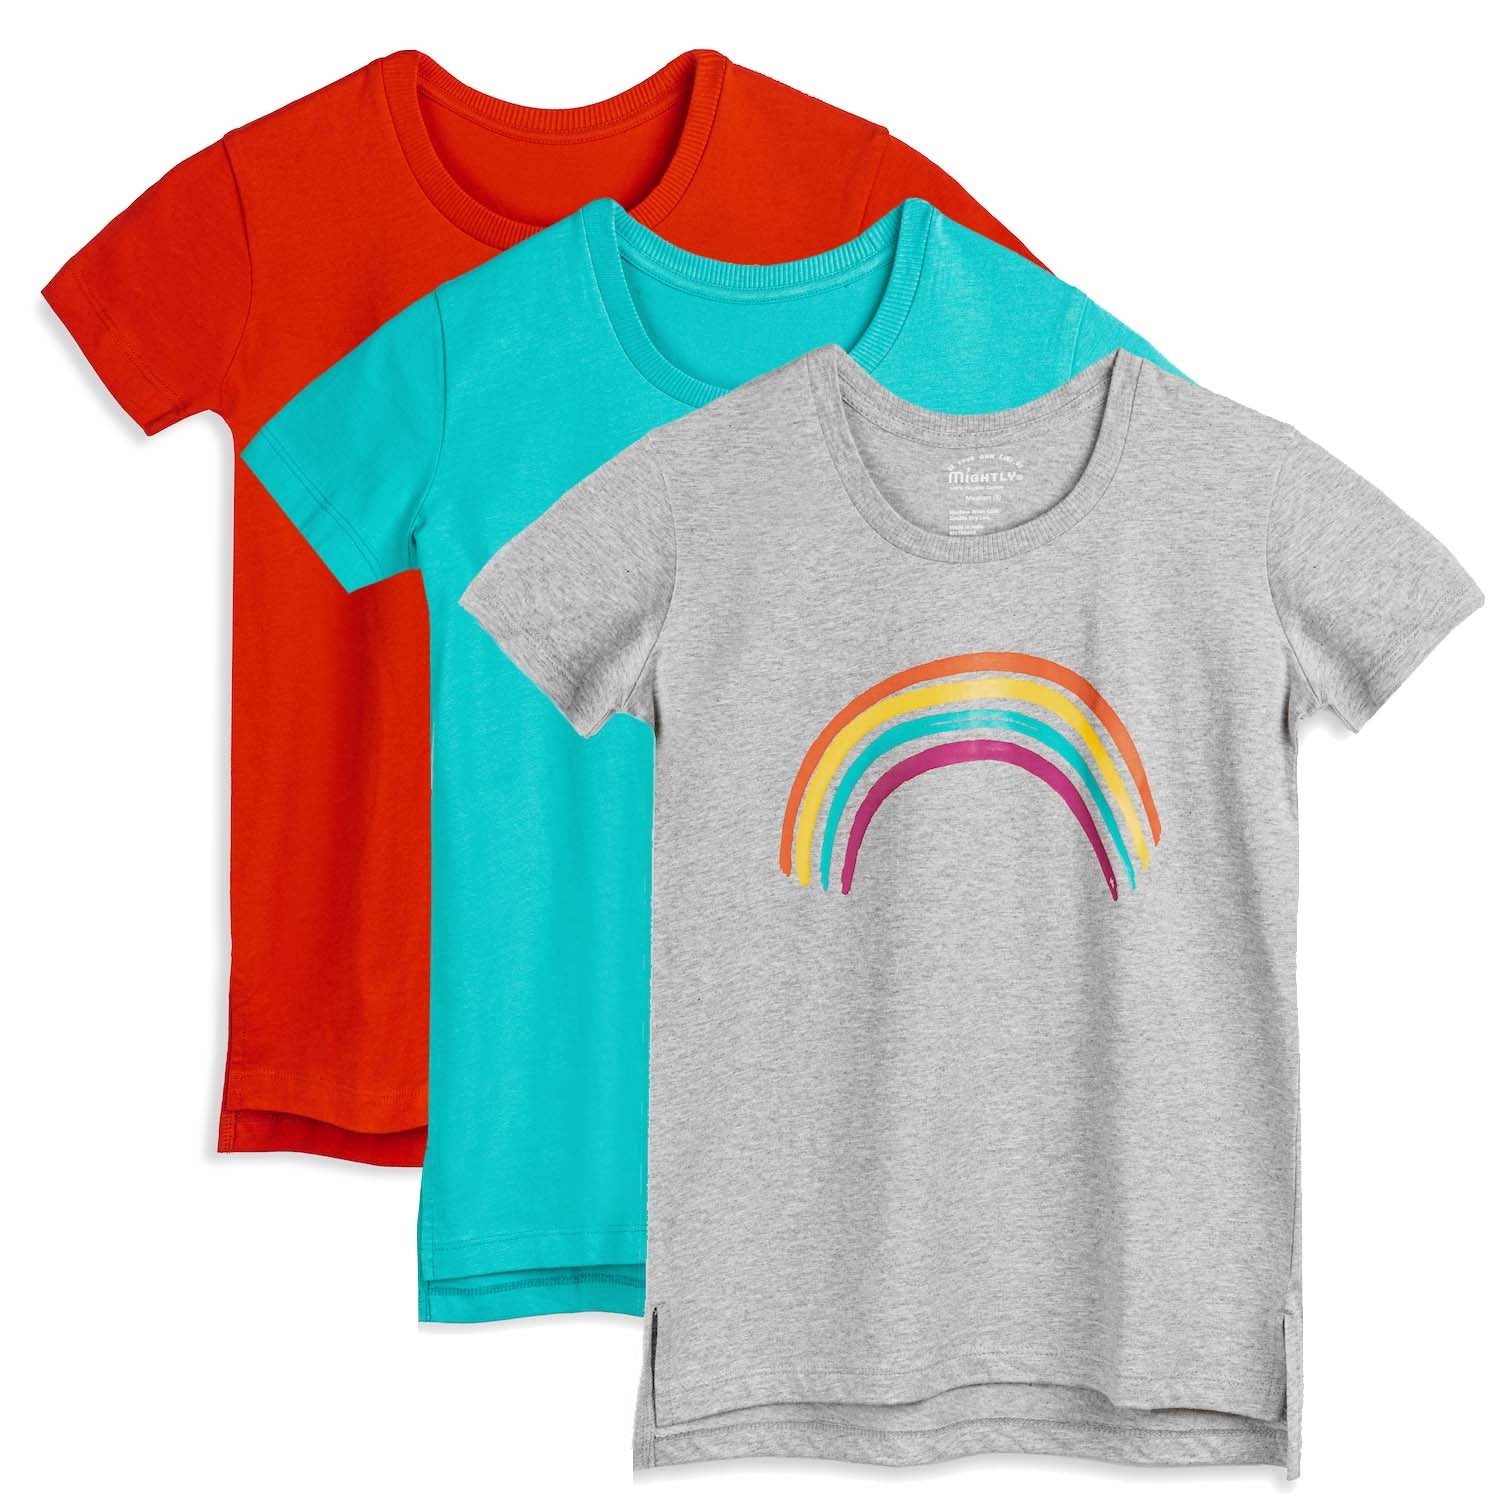 Organic Cotton Kids Shirts - Extended Length T-Shirts 3 Pack - Mightly